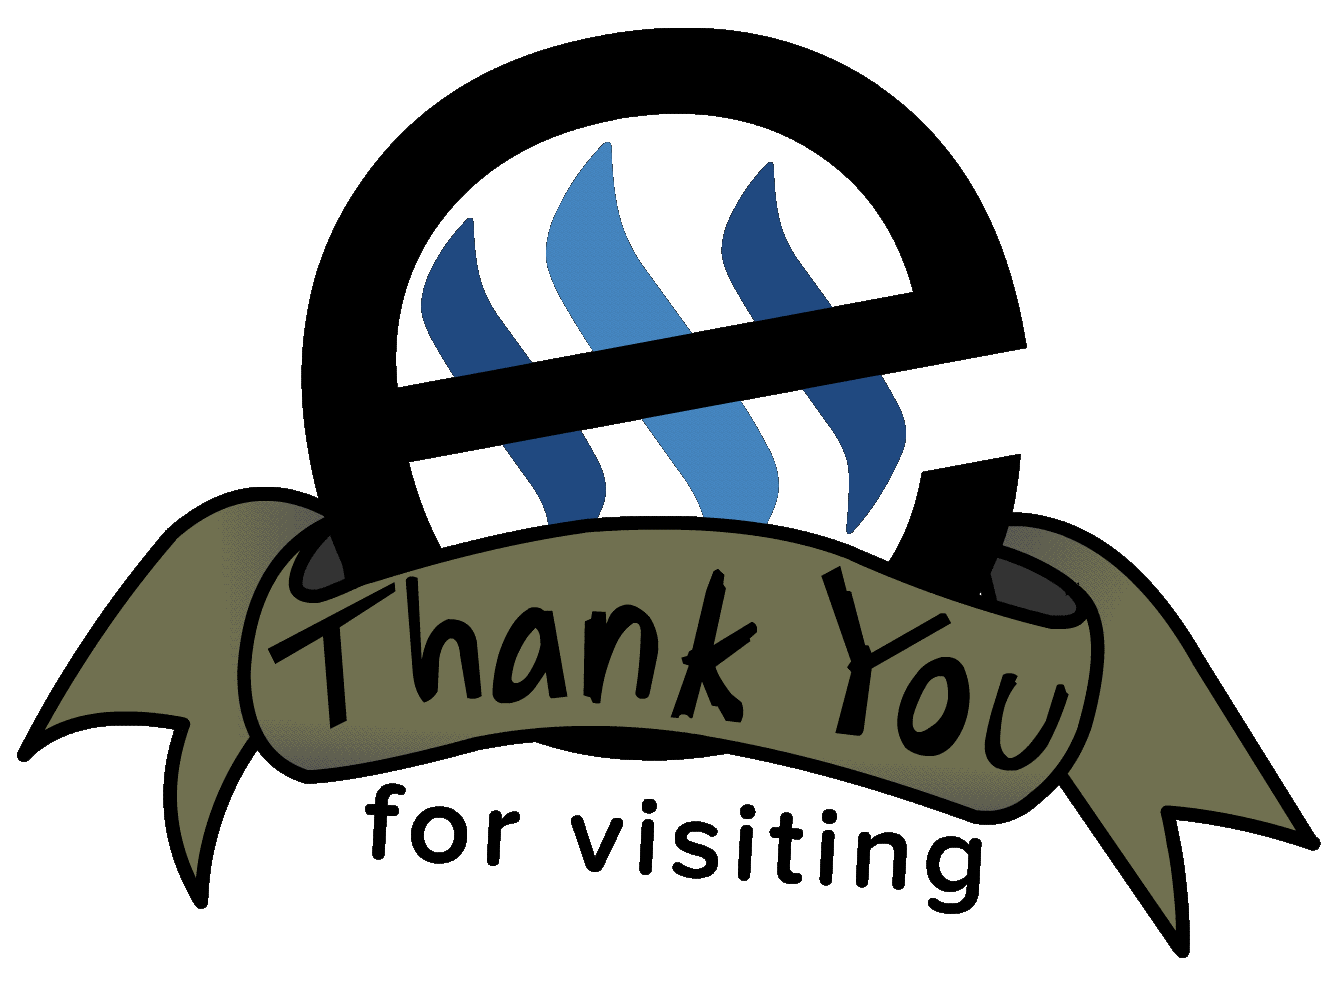 Thank You for visiting